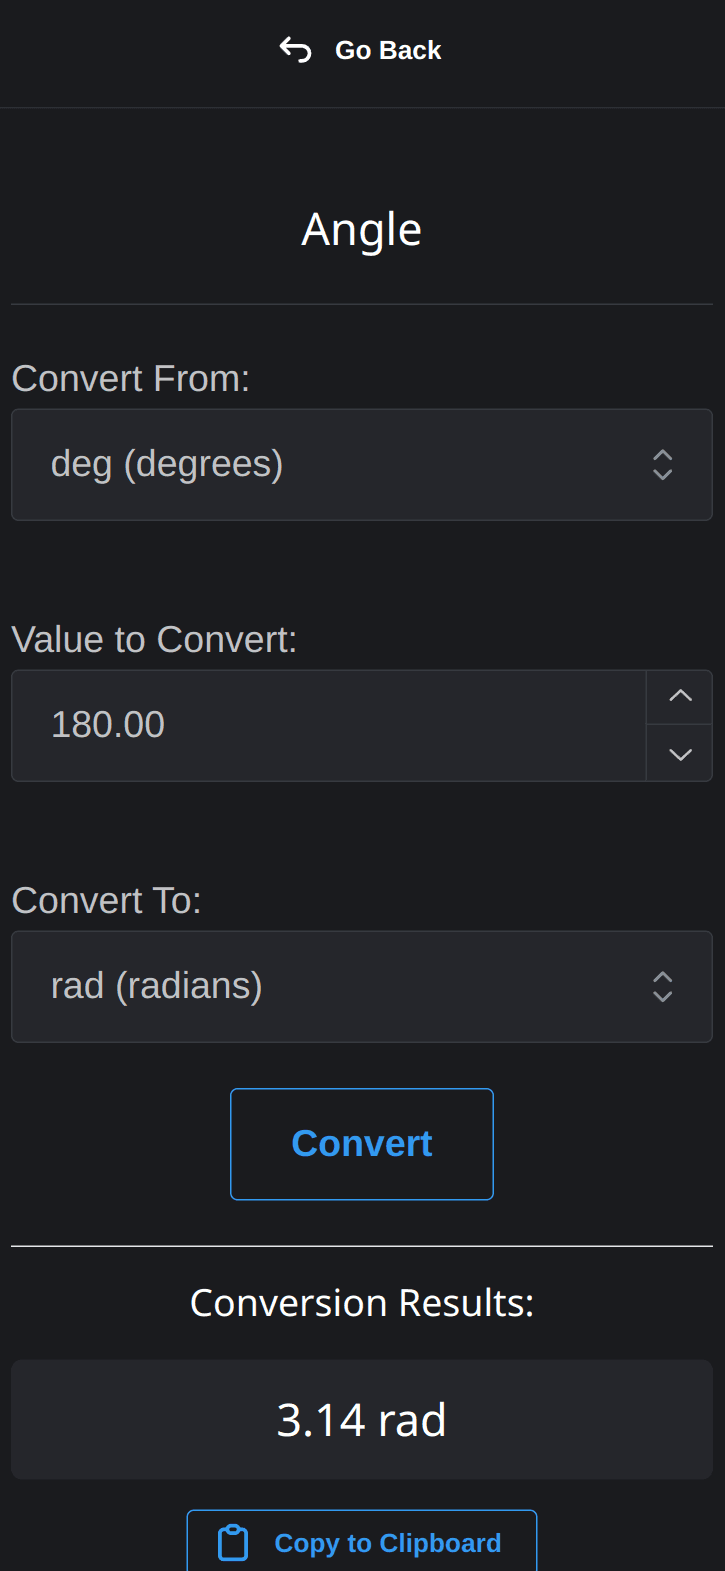 A screenshot of converting 100 degrees to radians (result is 3.14 radians, rounded to the nearest hundredth)